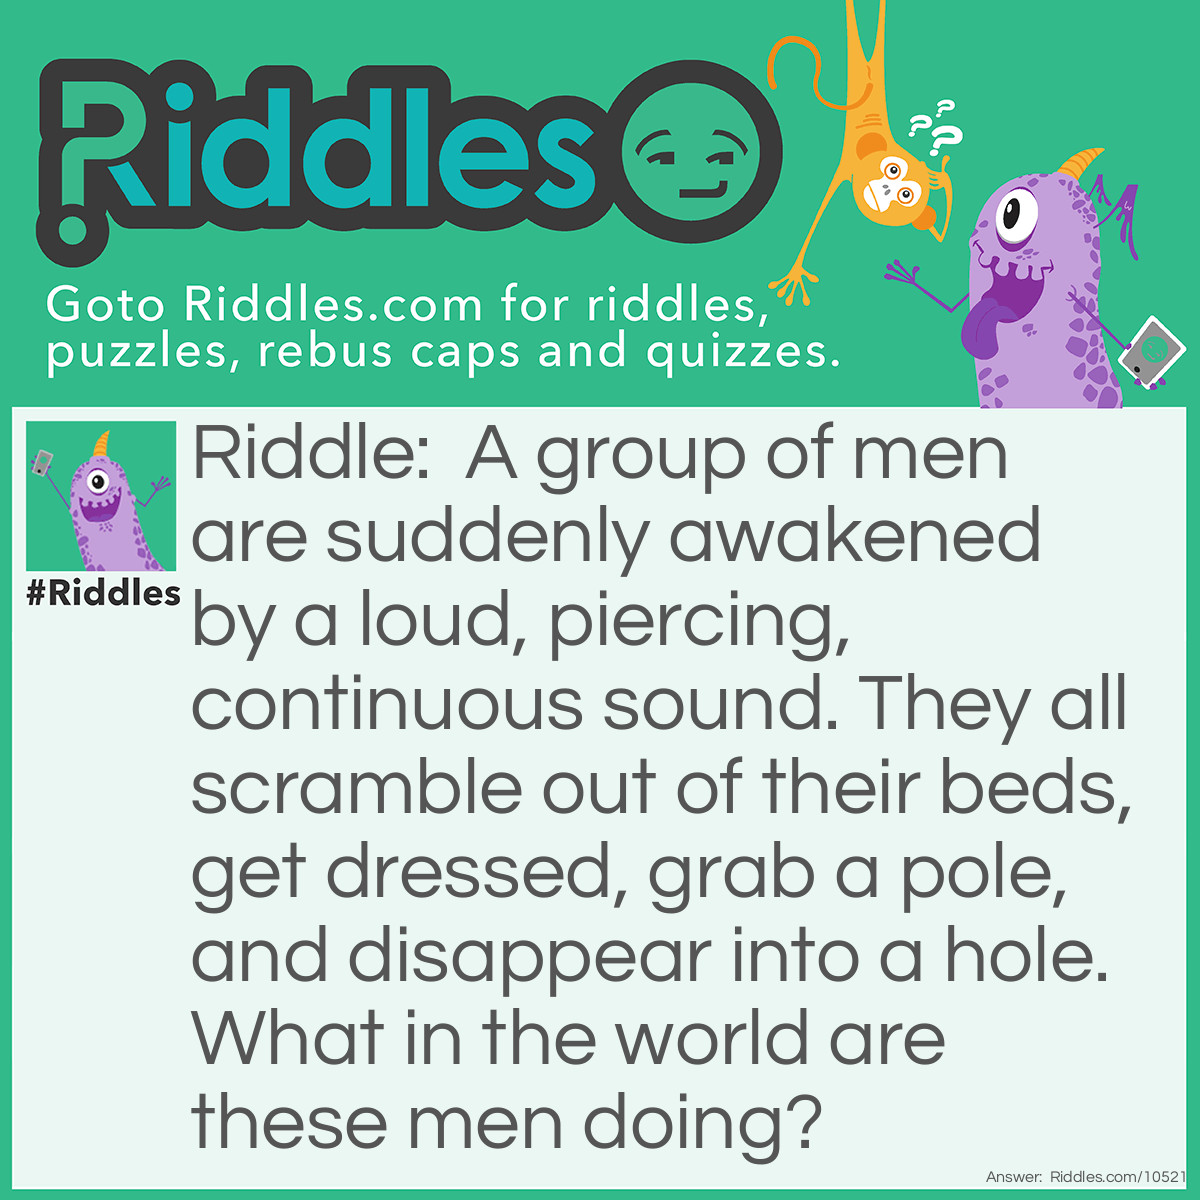 Riddle: A group of men are suddenly awakened by a loud, piercing, continuous sound. They all scramble out of their beds, get dressed, grab a pole, and disappear into a hole. What in the world are these men doing? Answer: They are firemen who were sleeping in their fire station. When they heard the fire alarm, they quickly got dressed, slid down the fire pole, and got in the fire engine to head to the reported fire.